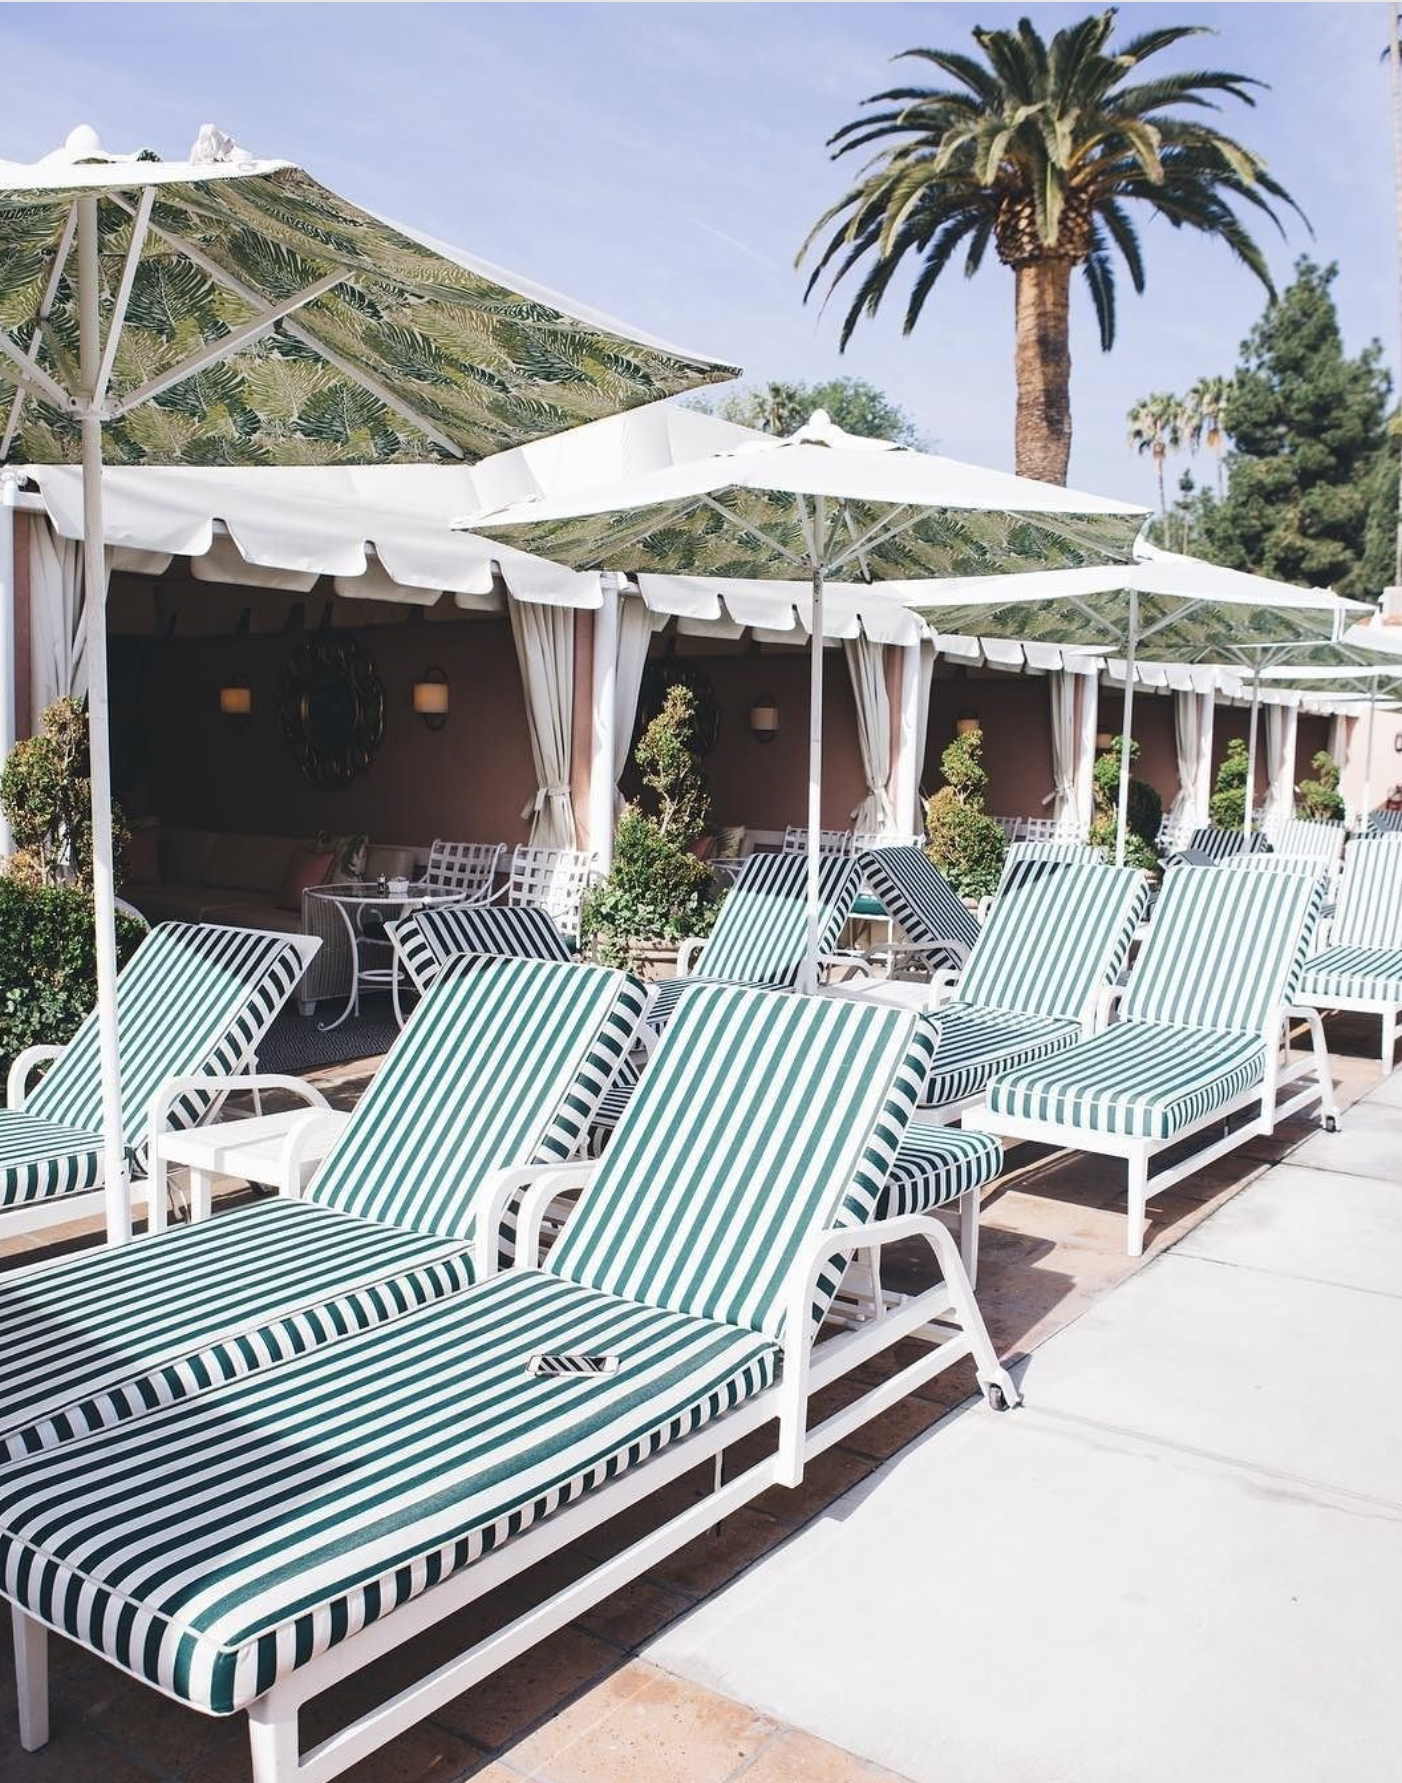 Poolside at the Iconic Beverly Hills Hotel Image